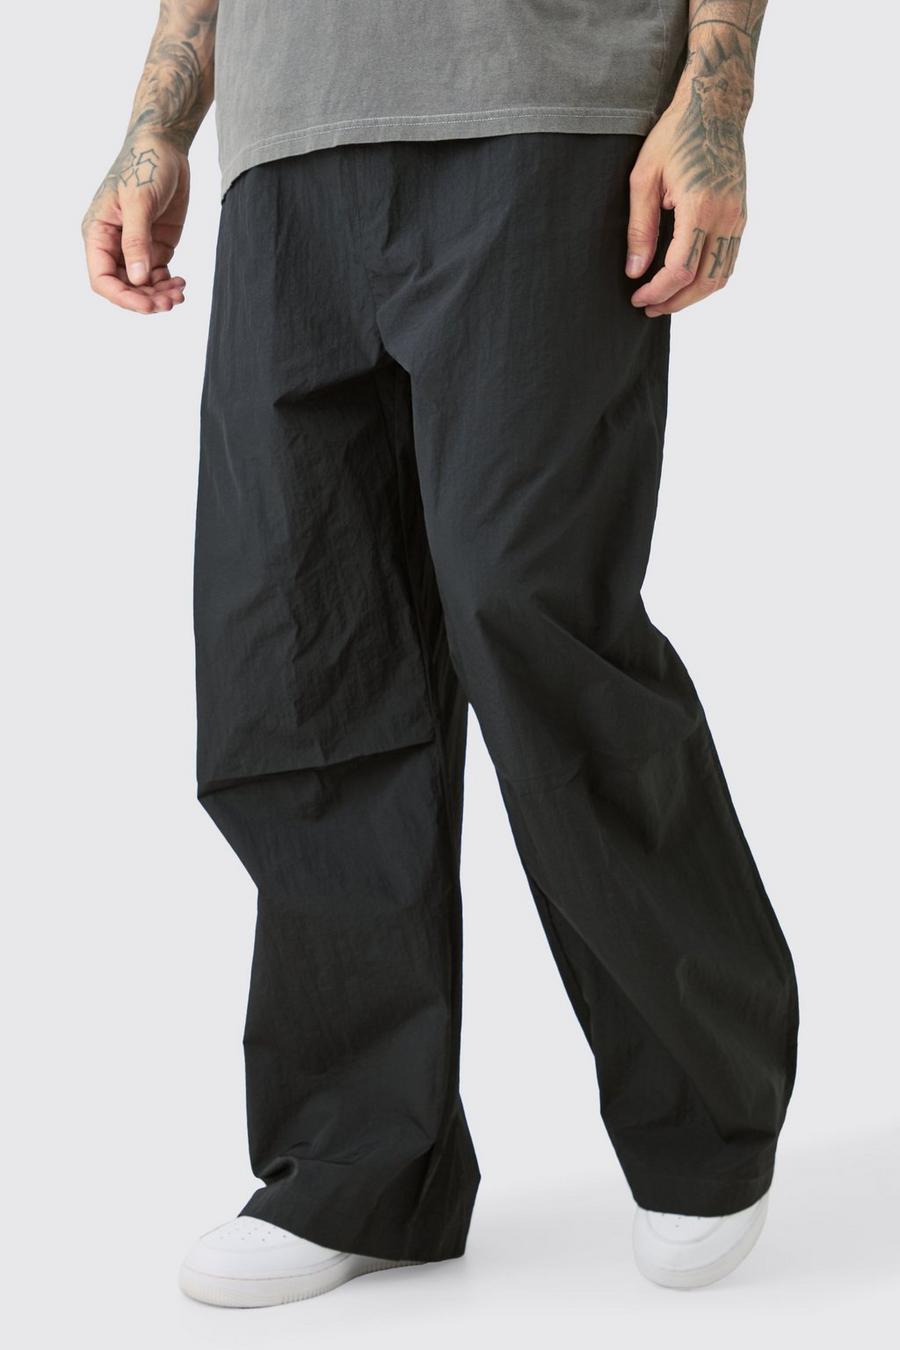 Black Tall Oversized Parachute Pants image number 1